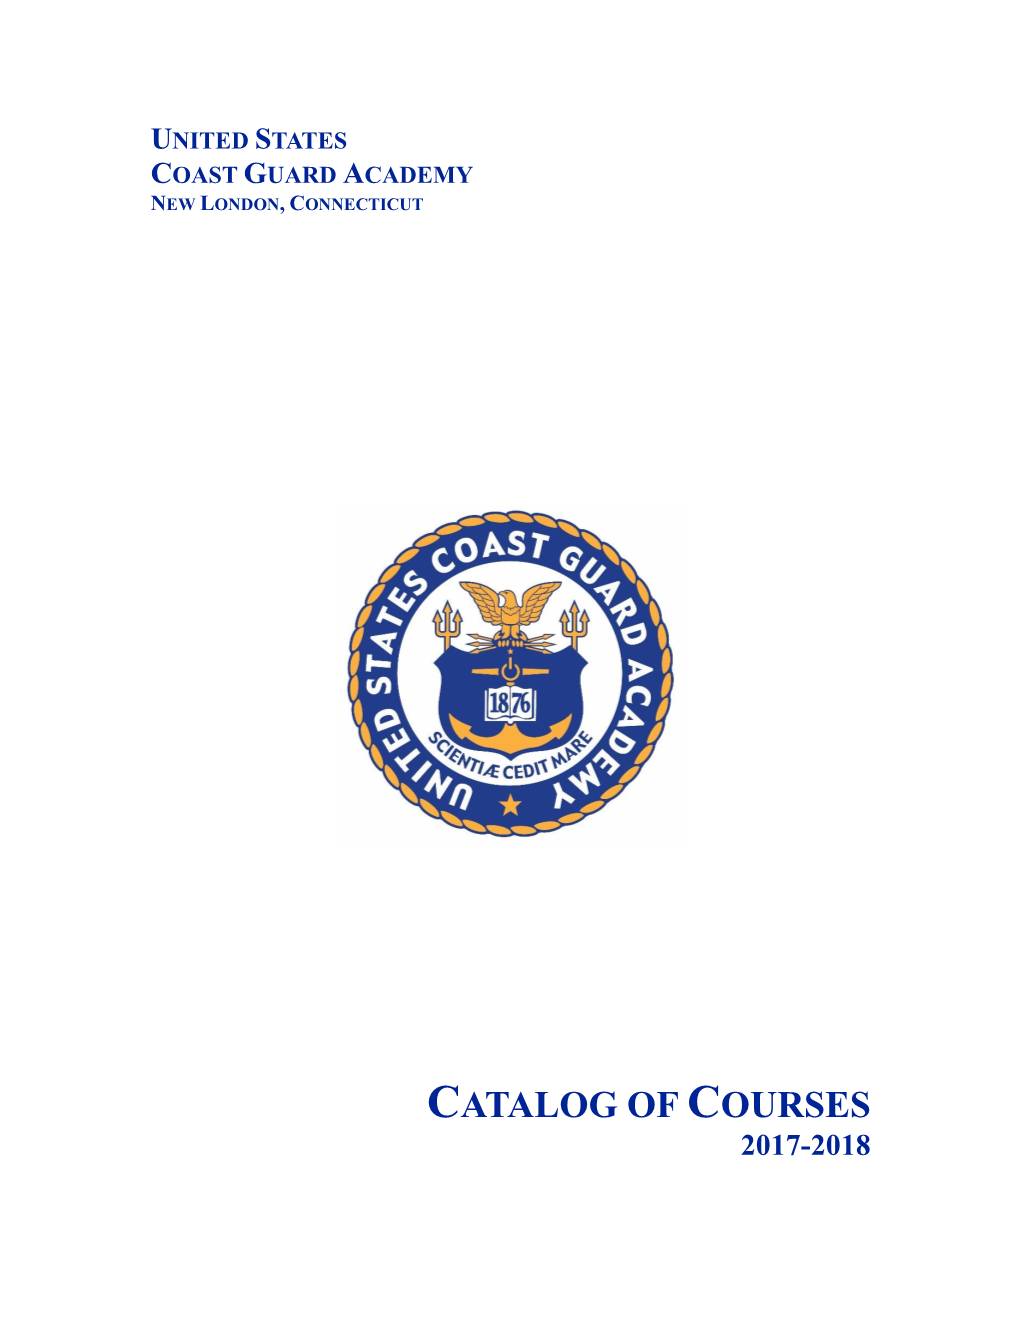 Catalog of Courses 2017-2018